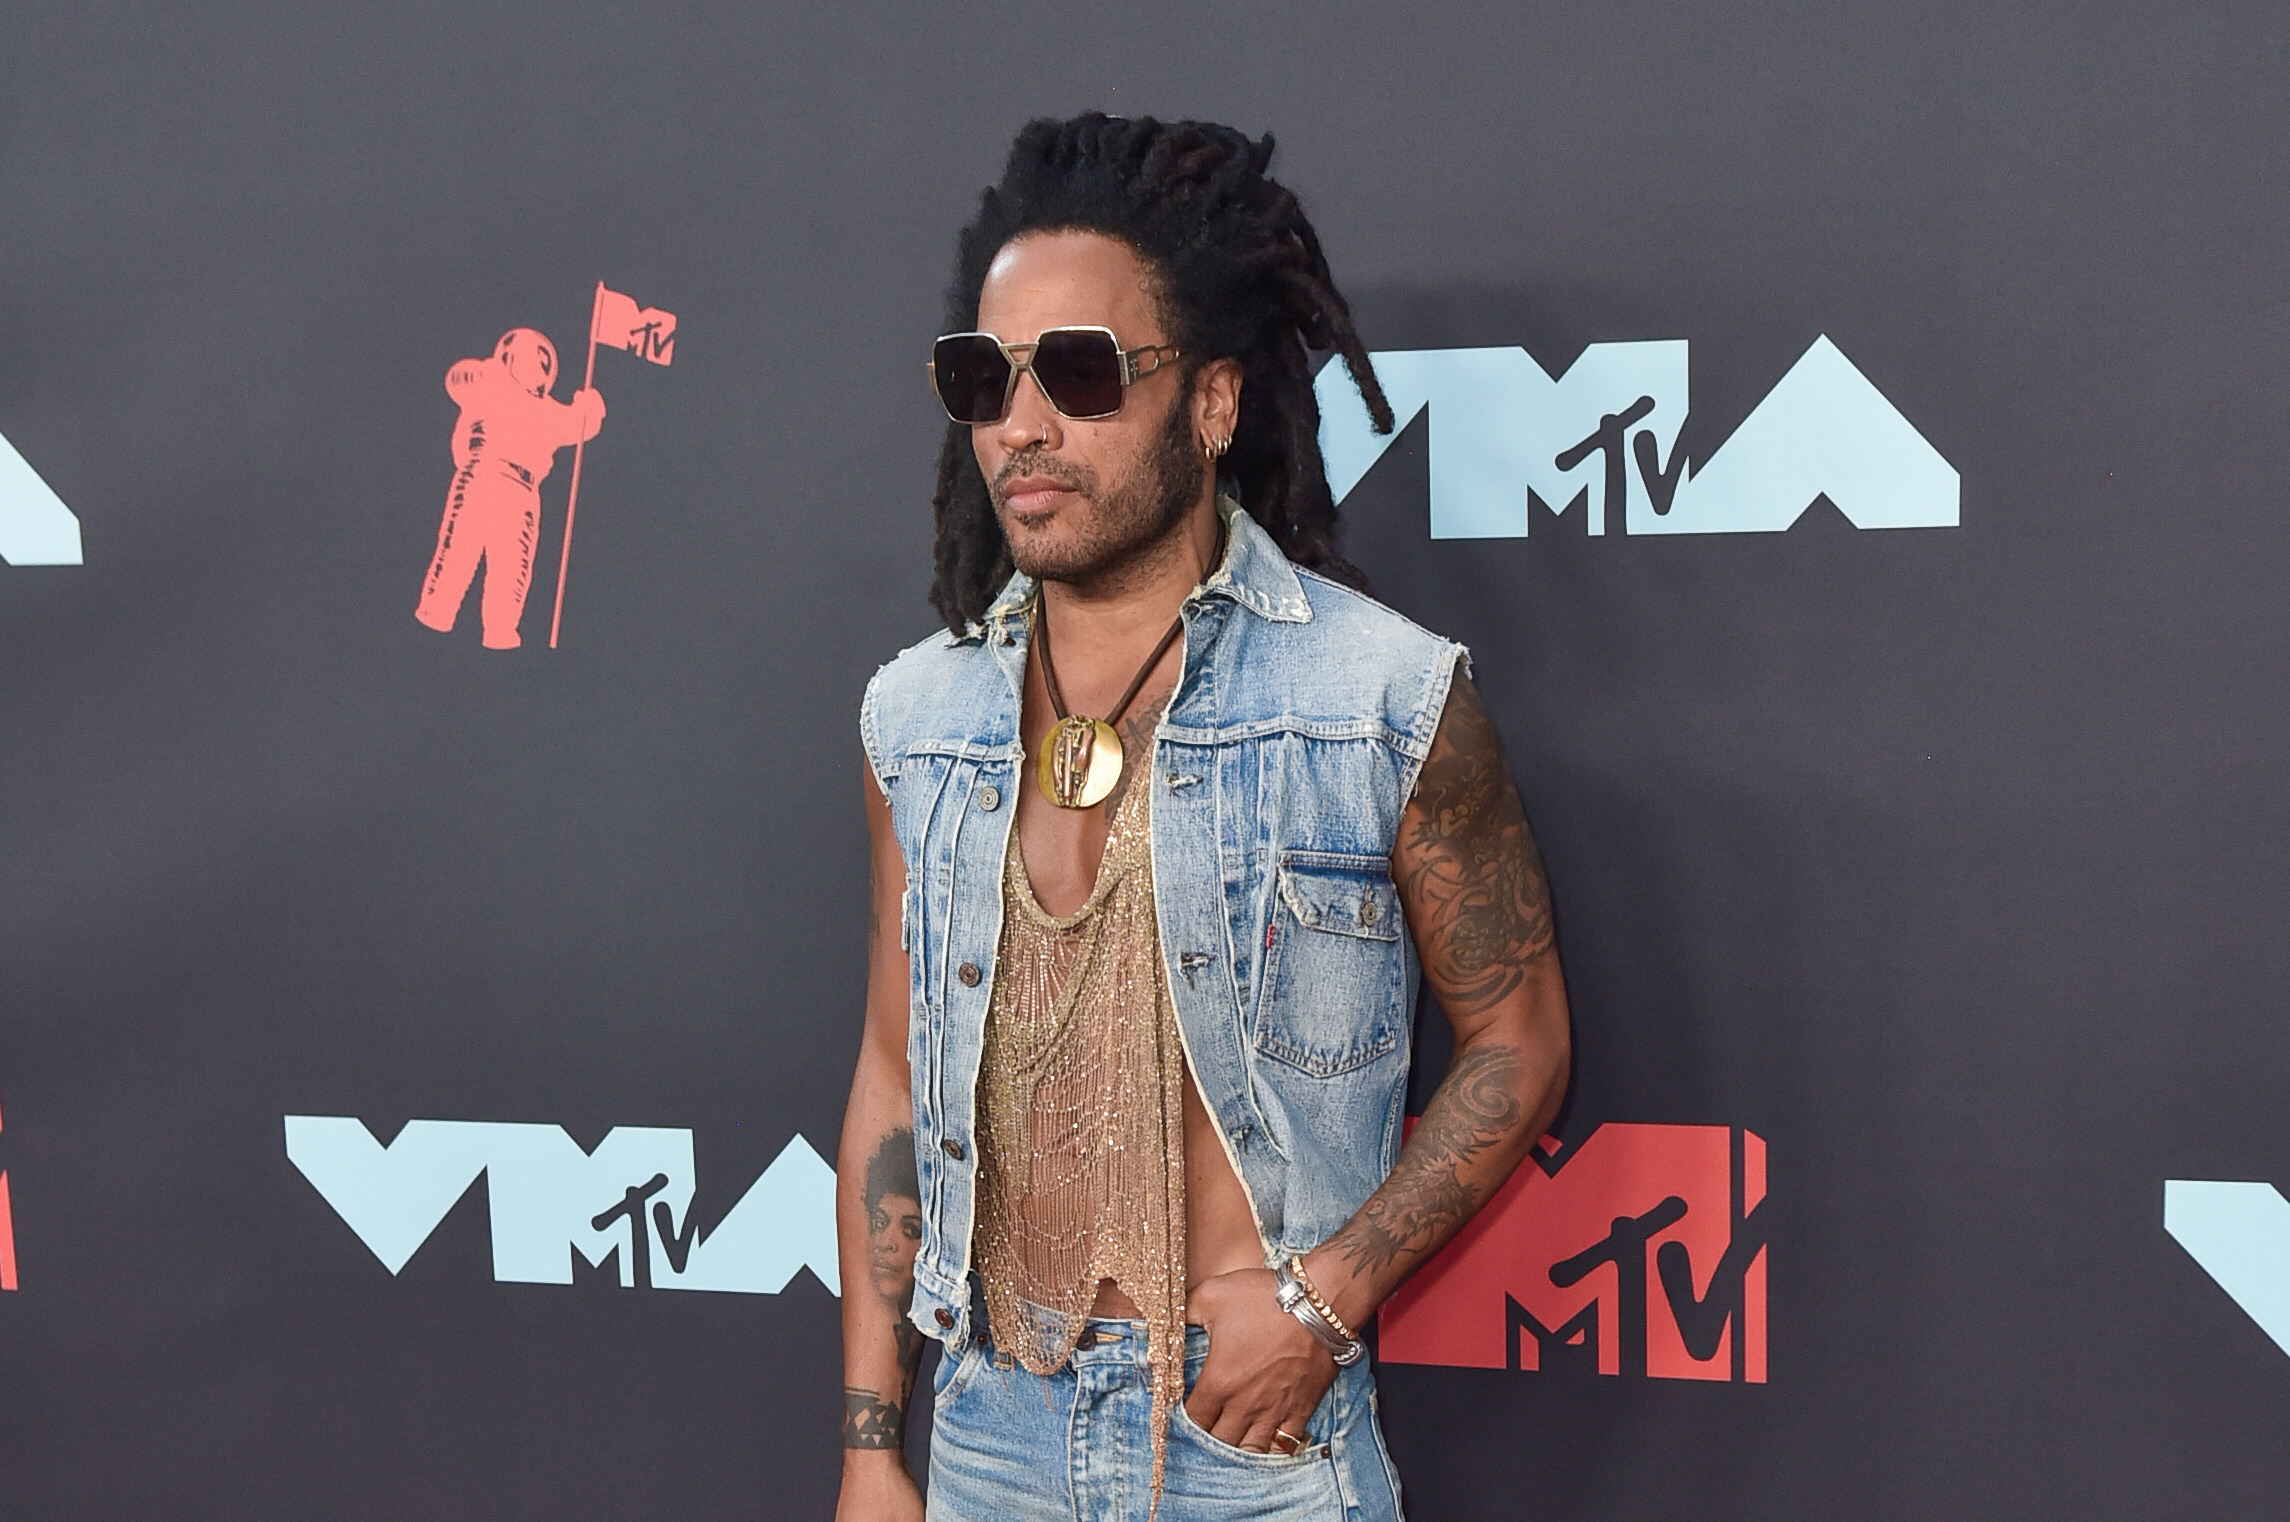 Lenny Kravitz at the MTV Video Music Awards | Aaron J. Thornton/Getty Images